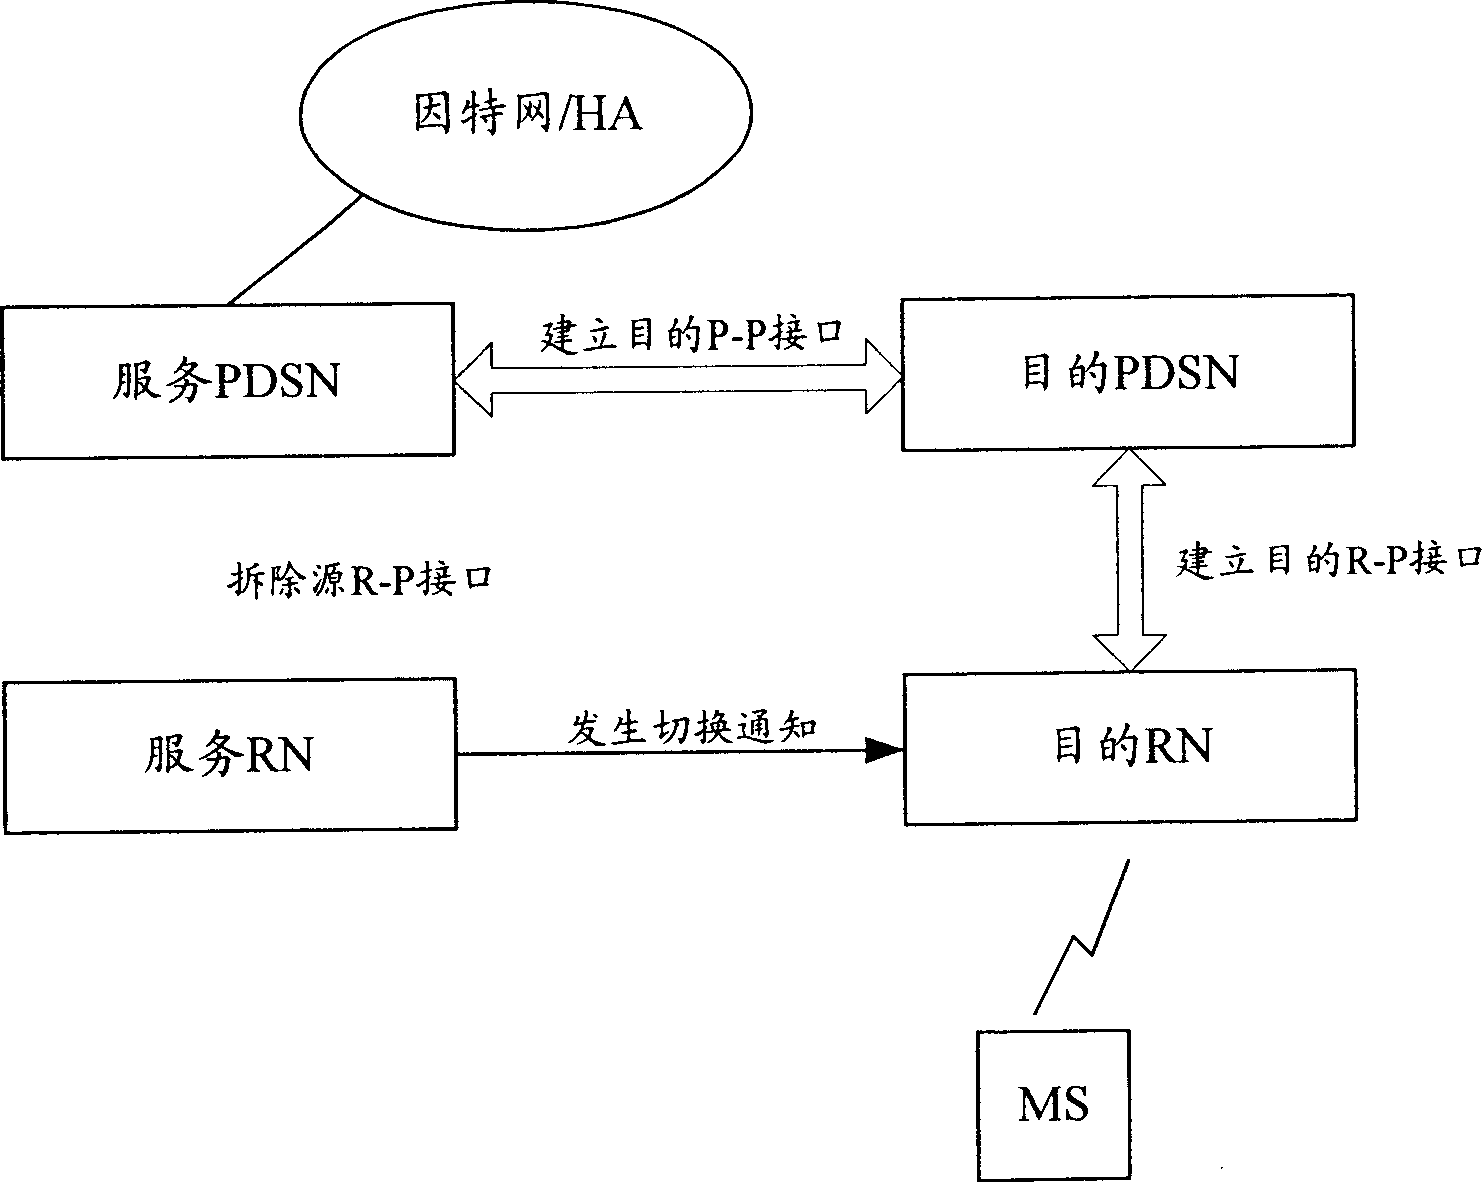 Method for setting-up Oos information while quick switching between grouped data service nodes